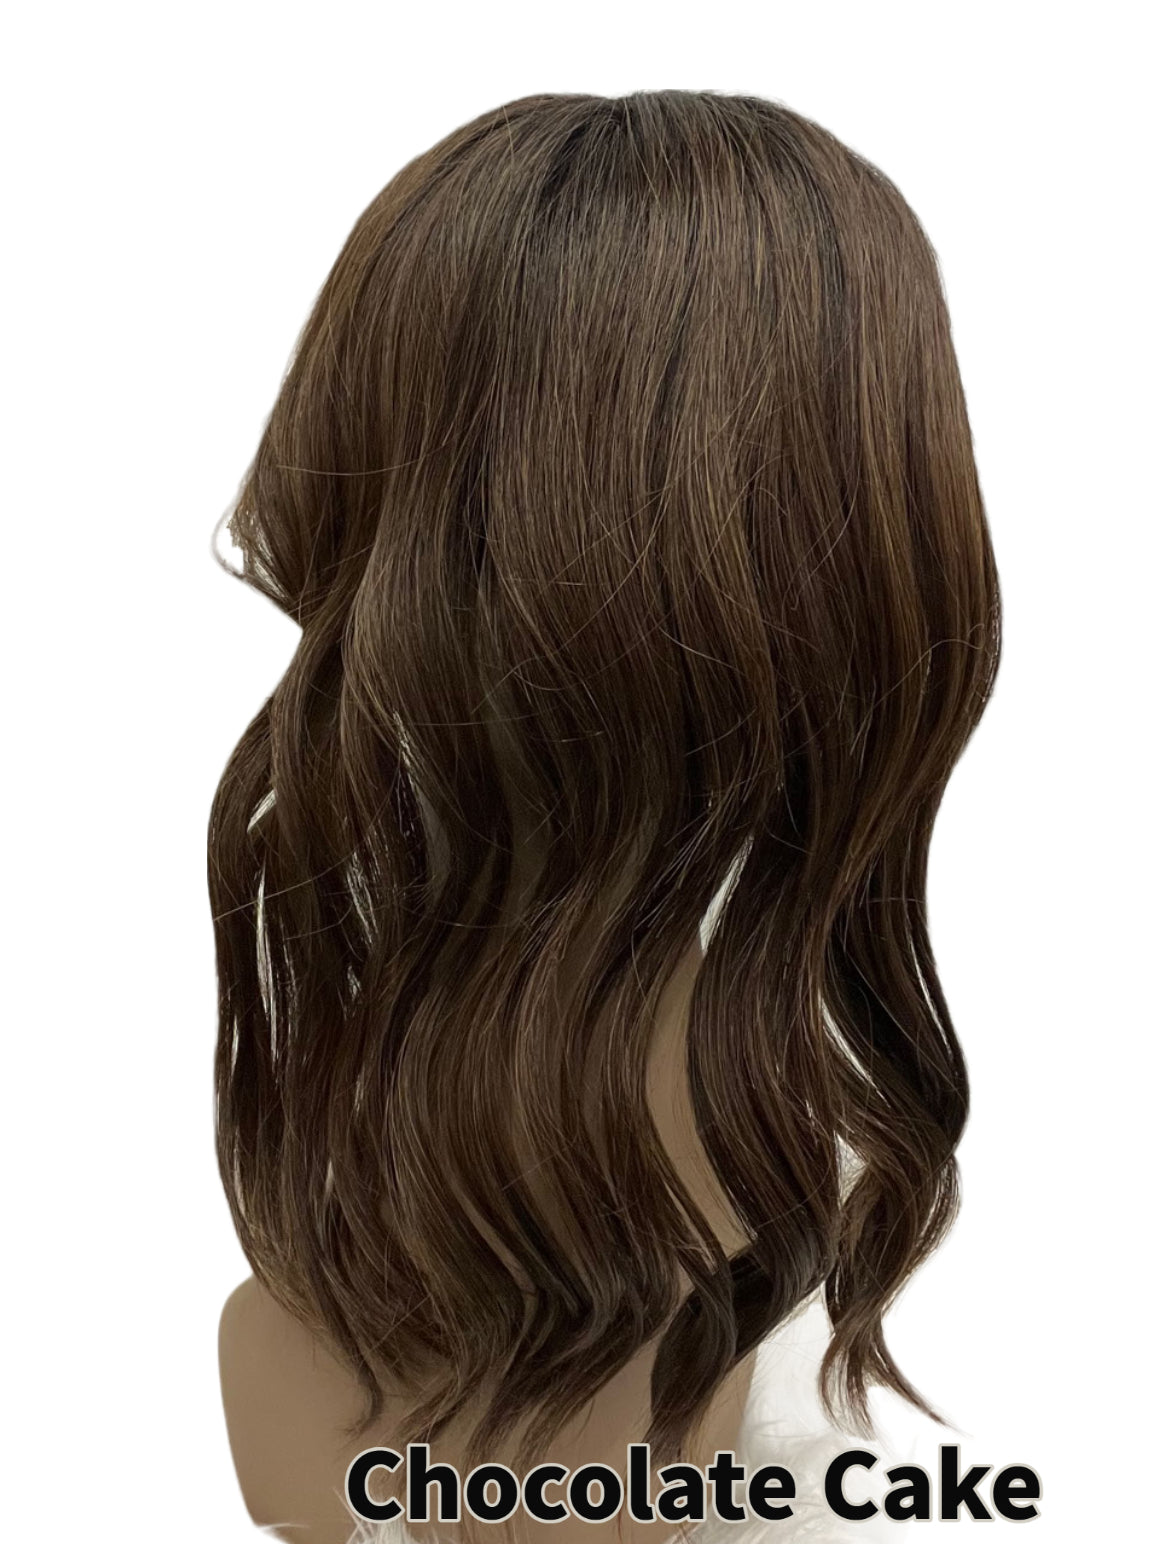 14 Inch Topper Wave LACE FRONT - 40% OFF THIS PRICE NO CODE NEEDED - FINAL SALE